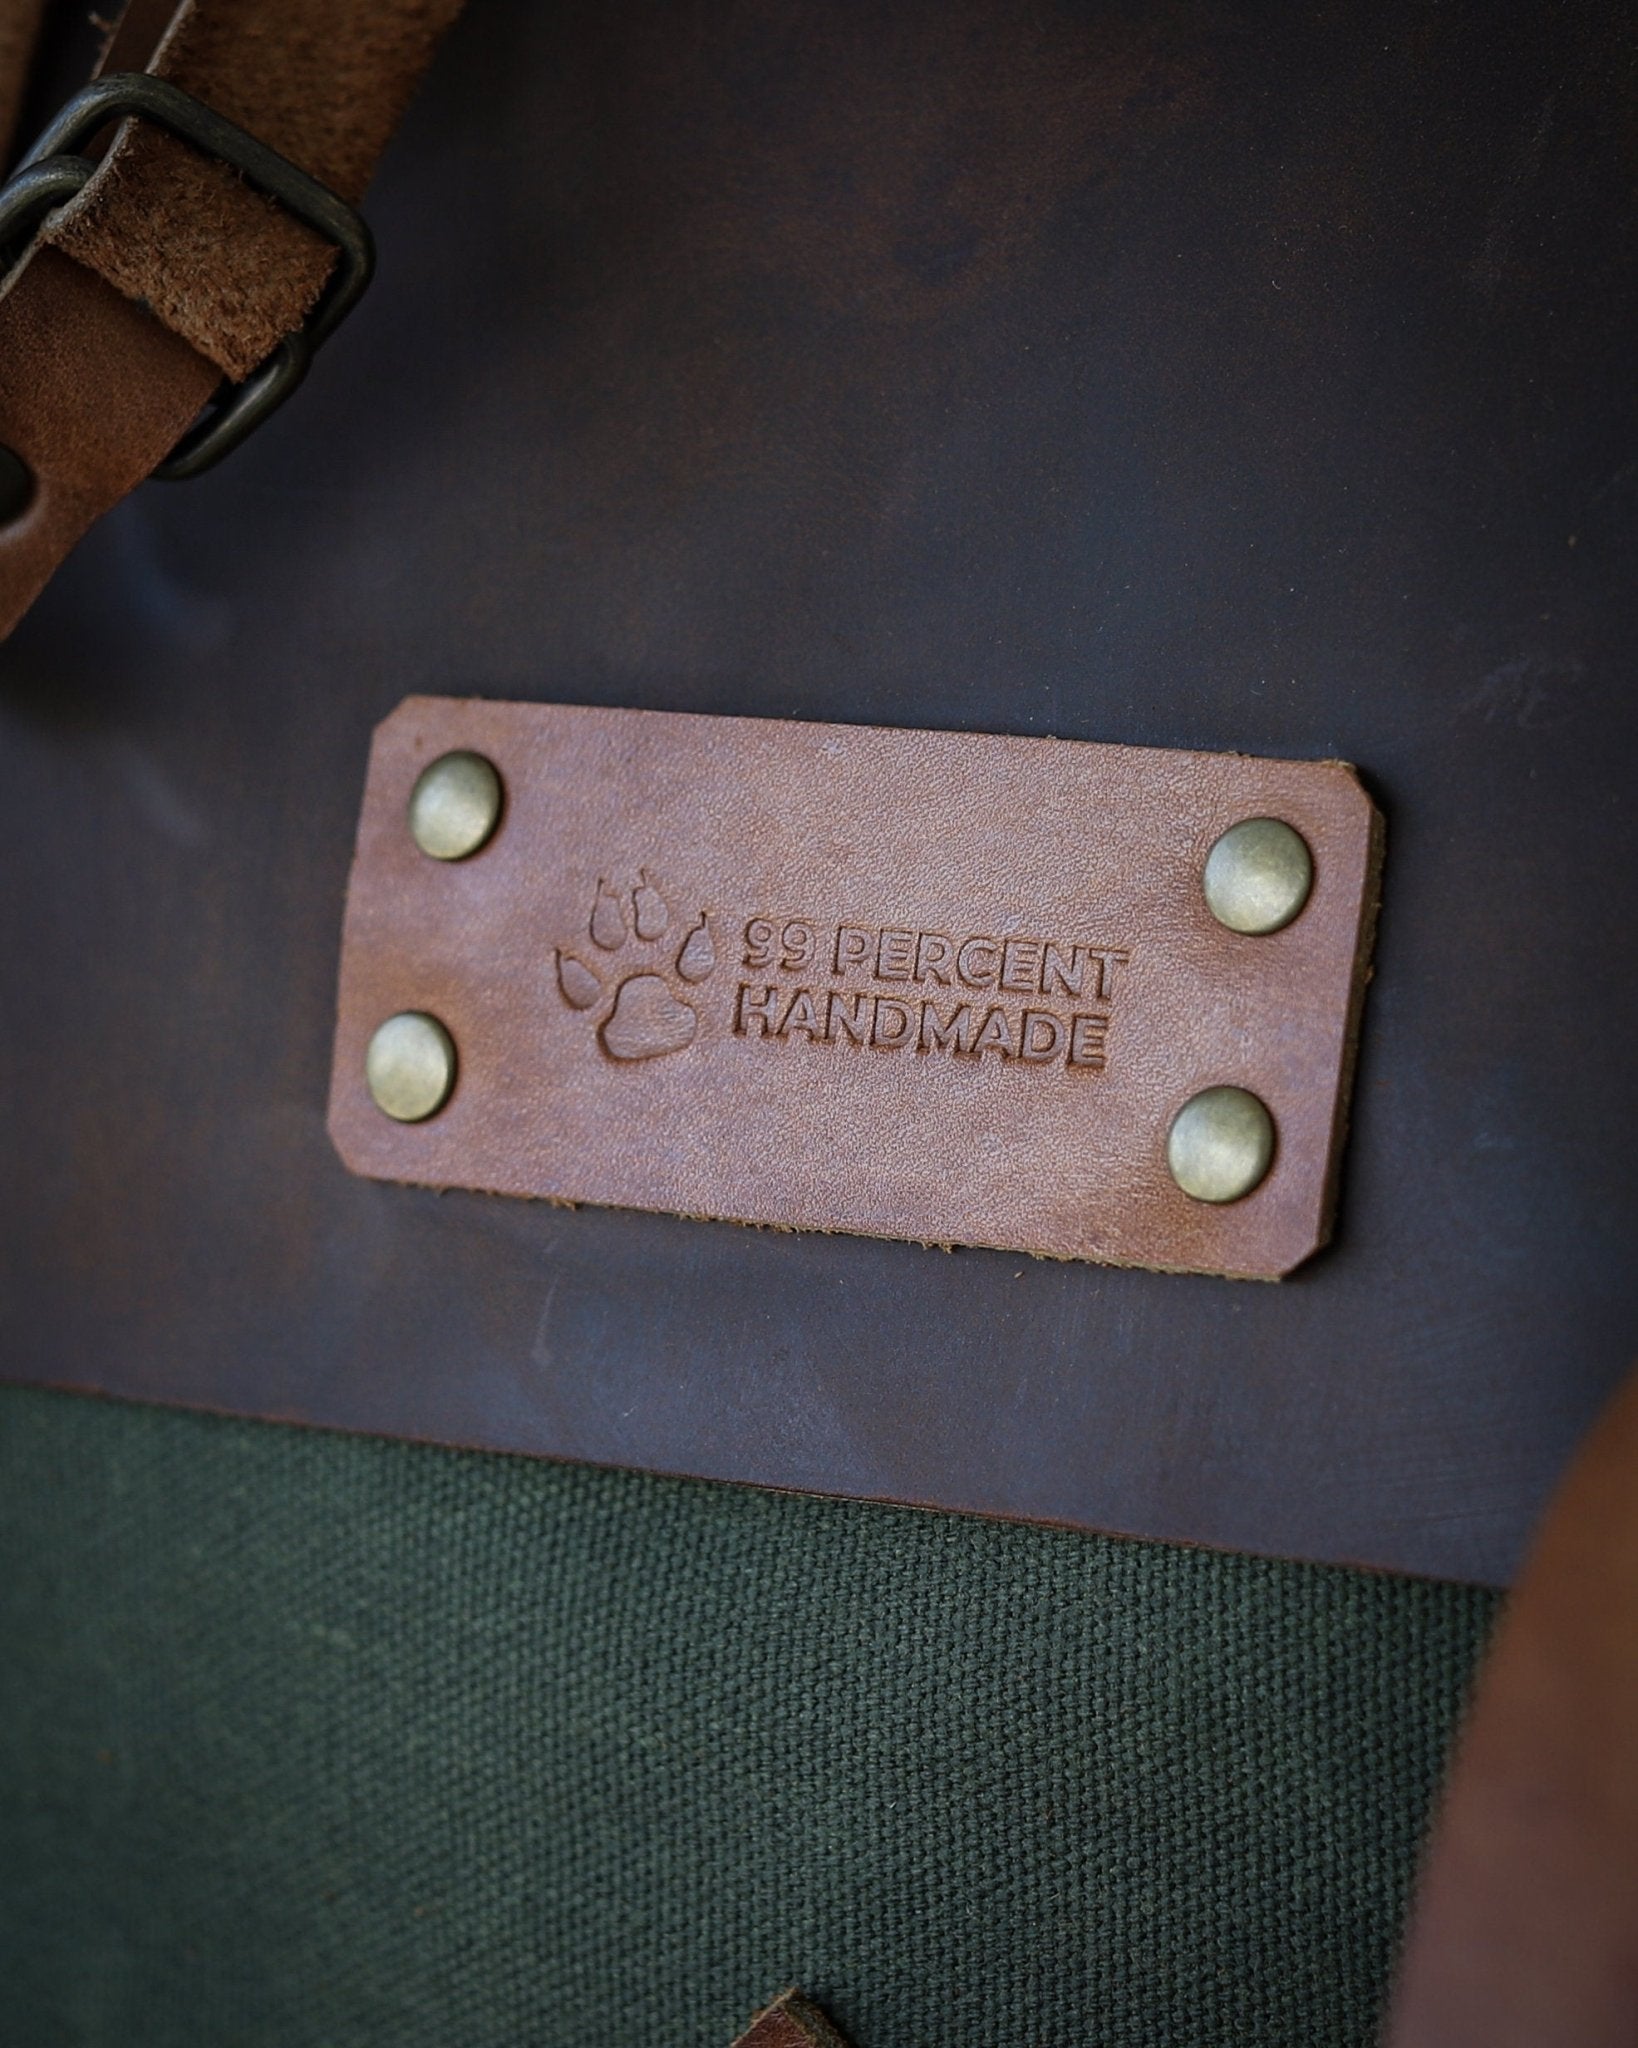 Tan or Brown Colour Options Handmade Leather Green and Waxed Canvas Backpack for | Travel | Bushcraft | Camping | 50 Liter | Personalization bushcraft - camping - hiking backpack 99percenthandmade   